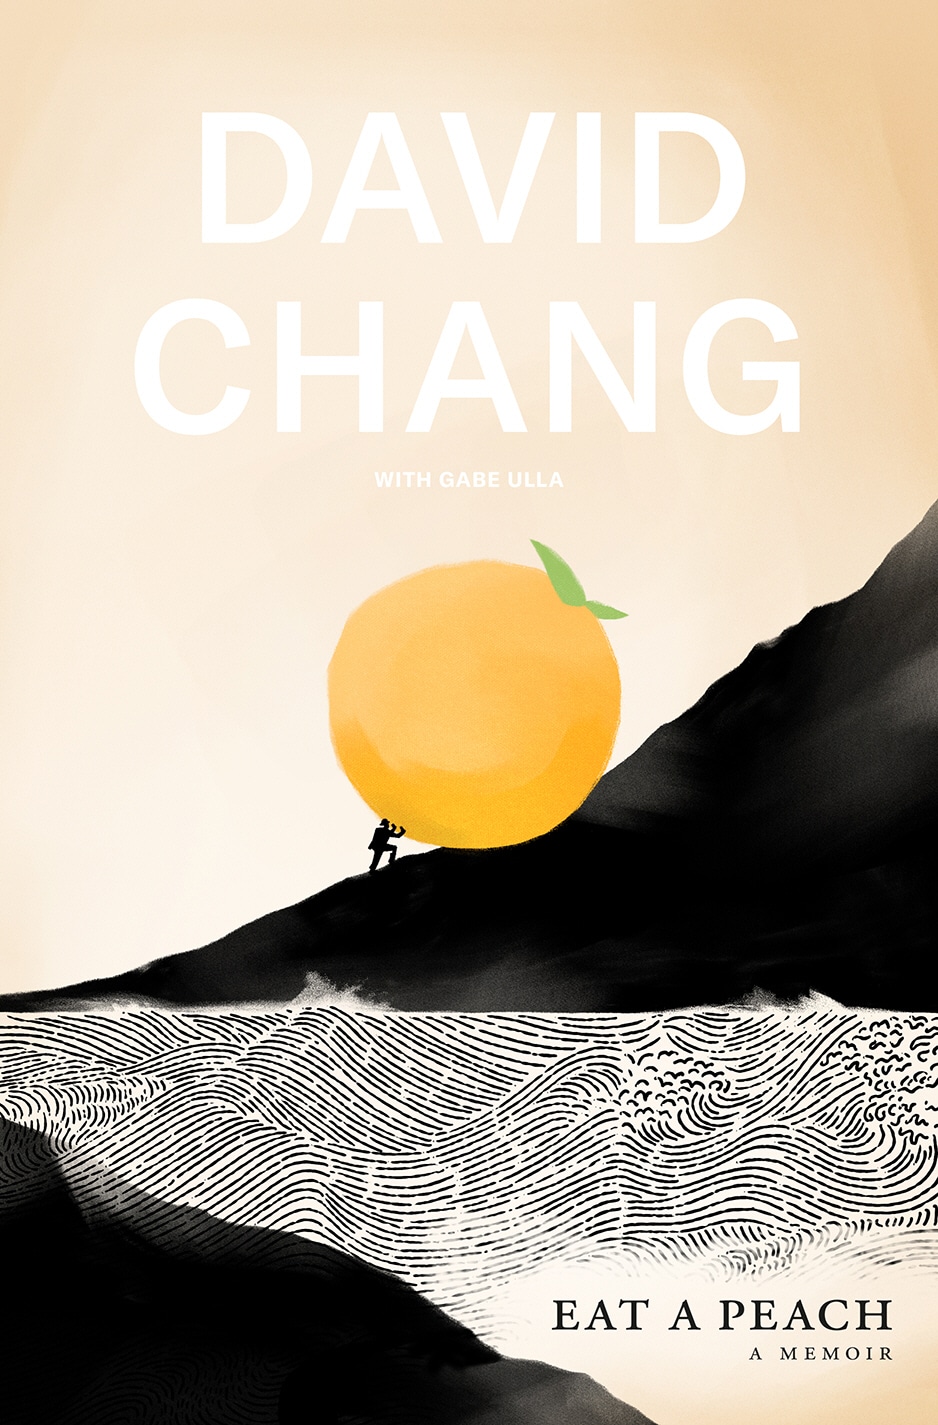 Book “Eat A Peach” by David Chang — February 4, 2021